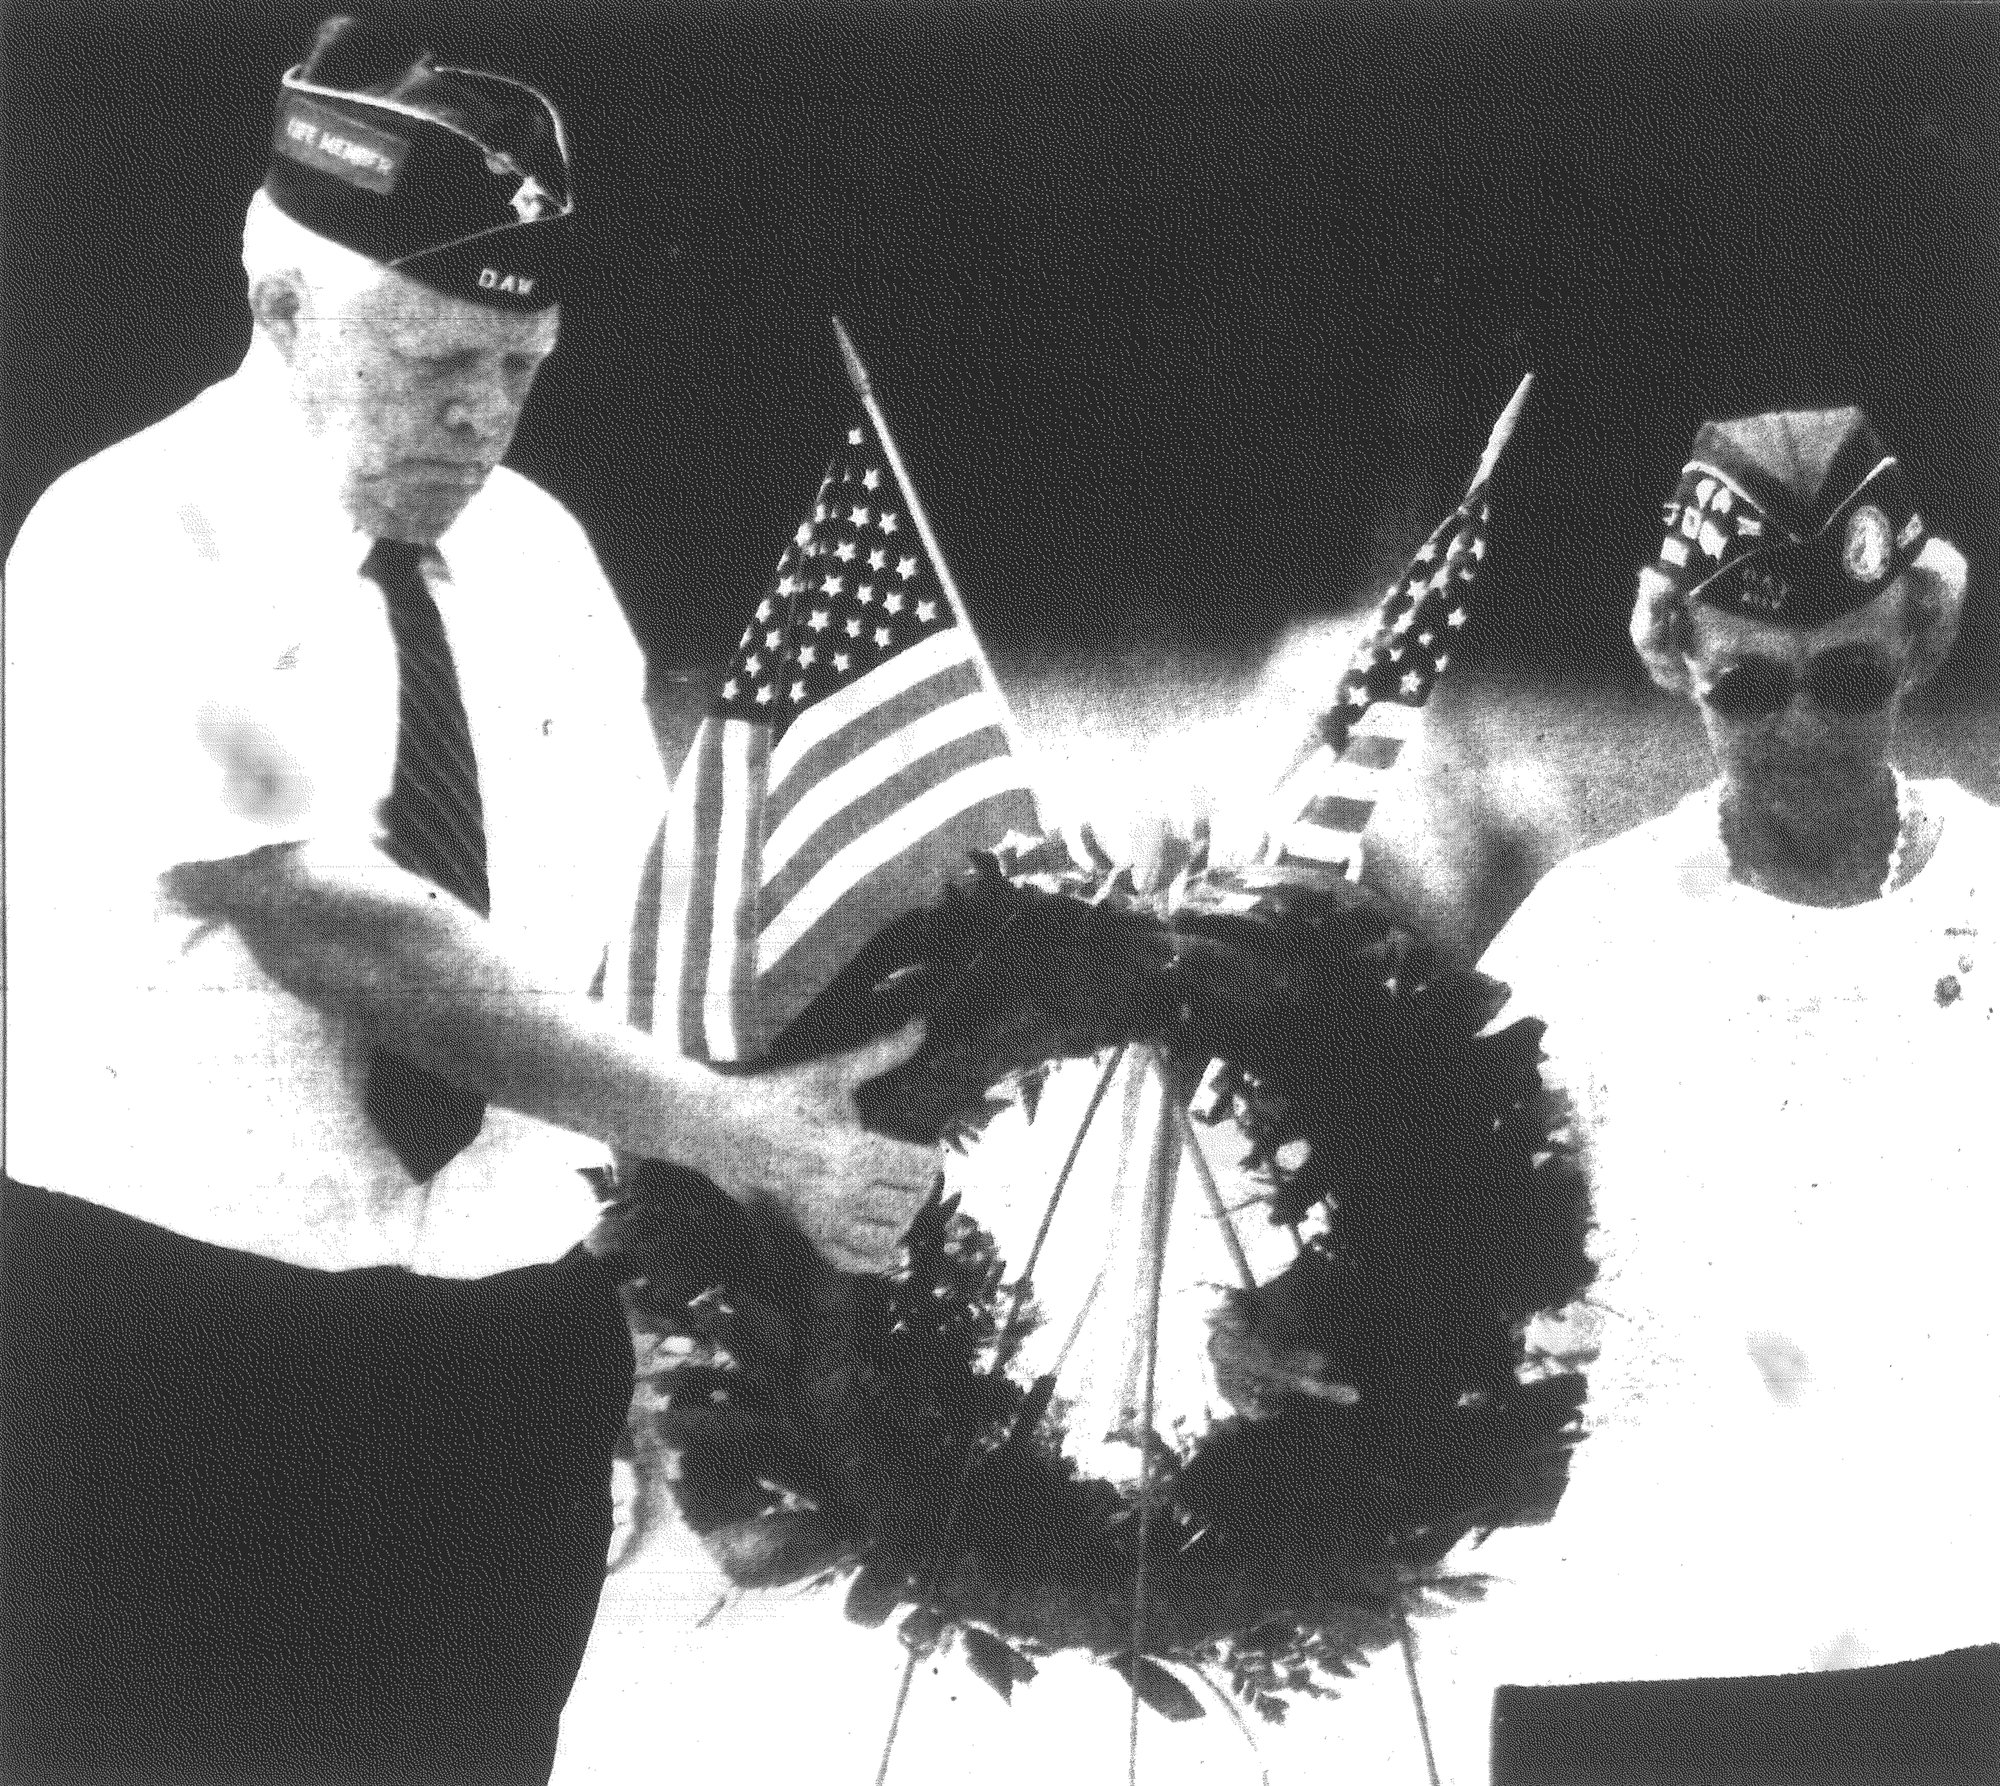 Disabled American Veterans Commander Joseph E. Barwick and Gisele Forest, a DAV auxiliary member, place a wreath at Evergreen Cemetery during a Memorial Day ceremony in 1991 in honor of those from Sumter County who gave their lives.